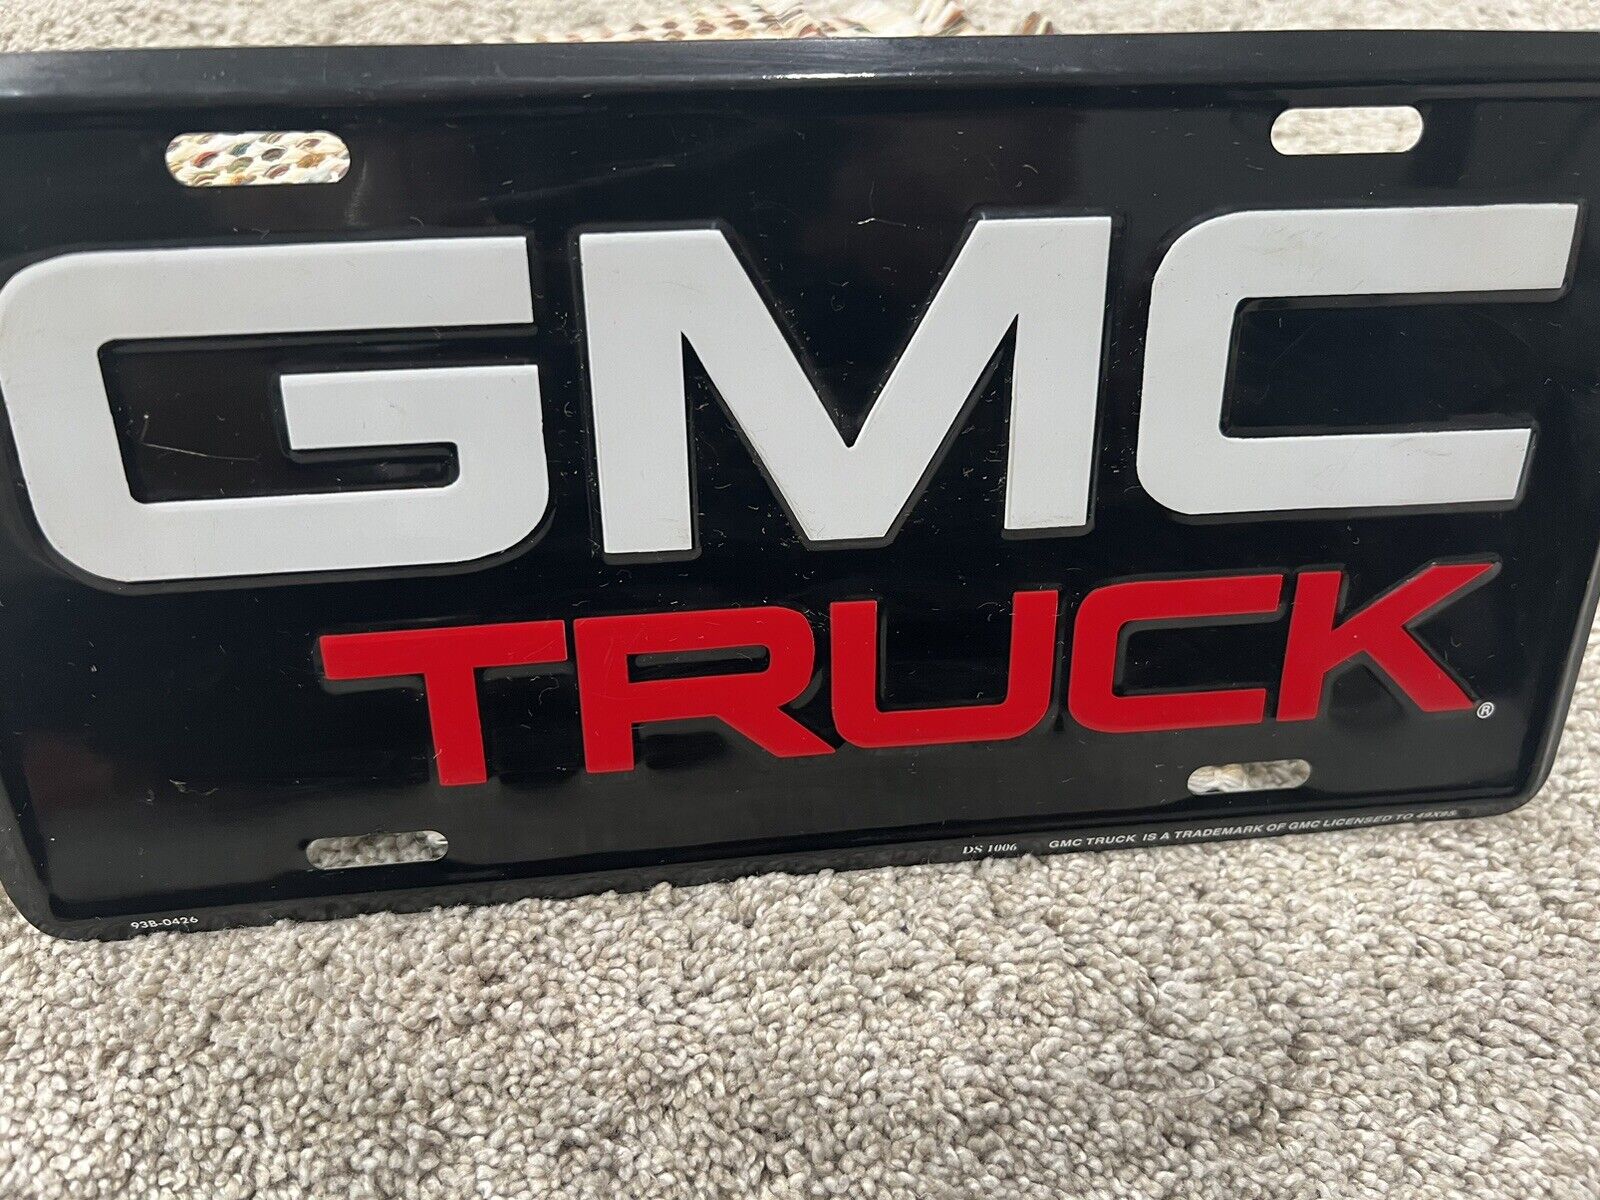 Vintage GMC Truck Booster License Plate